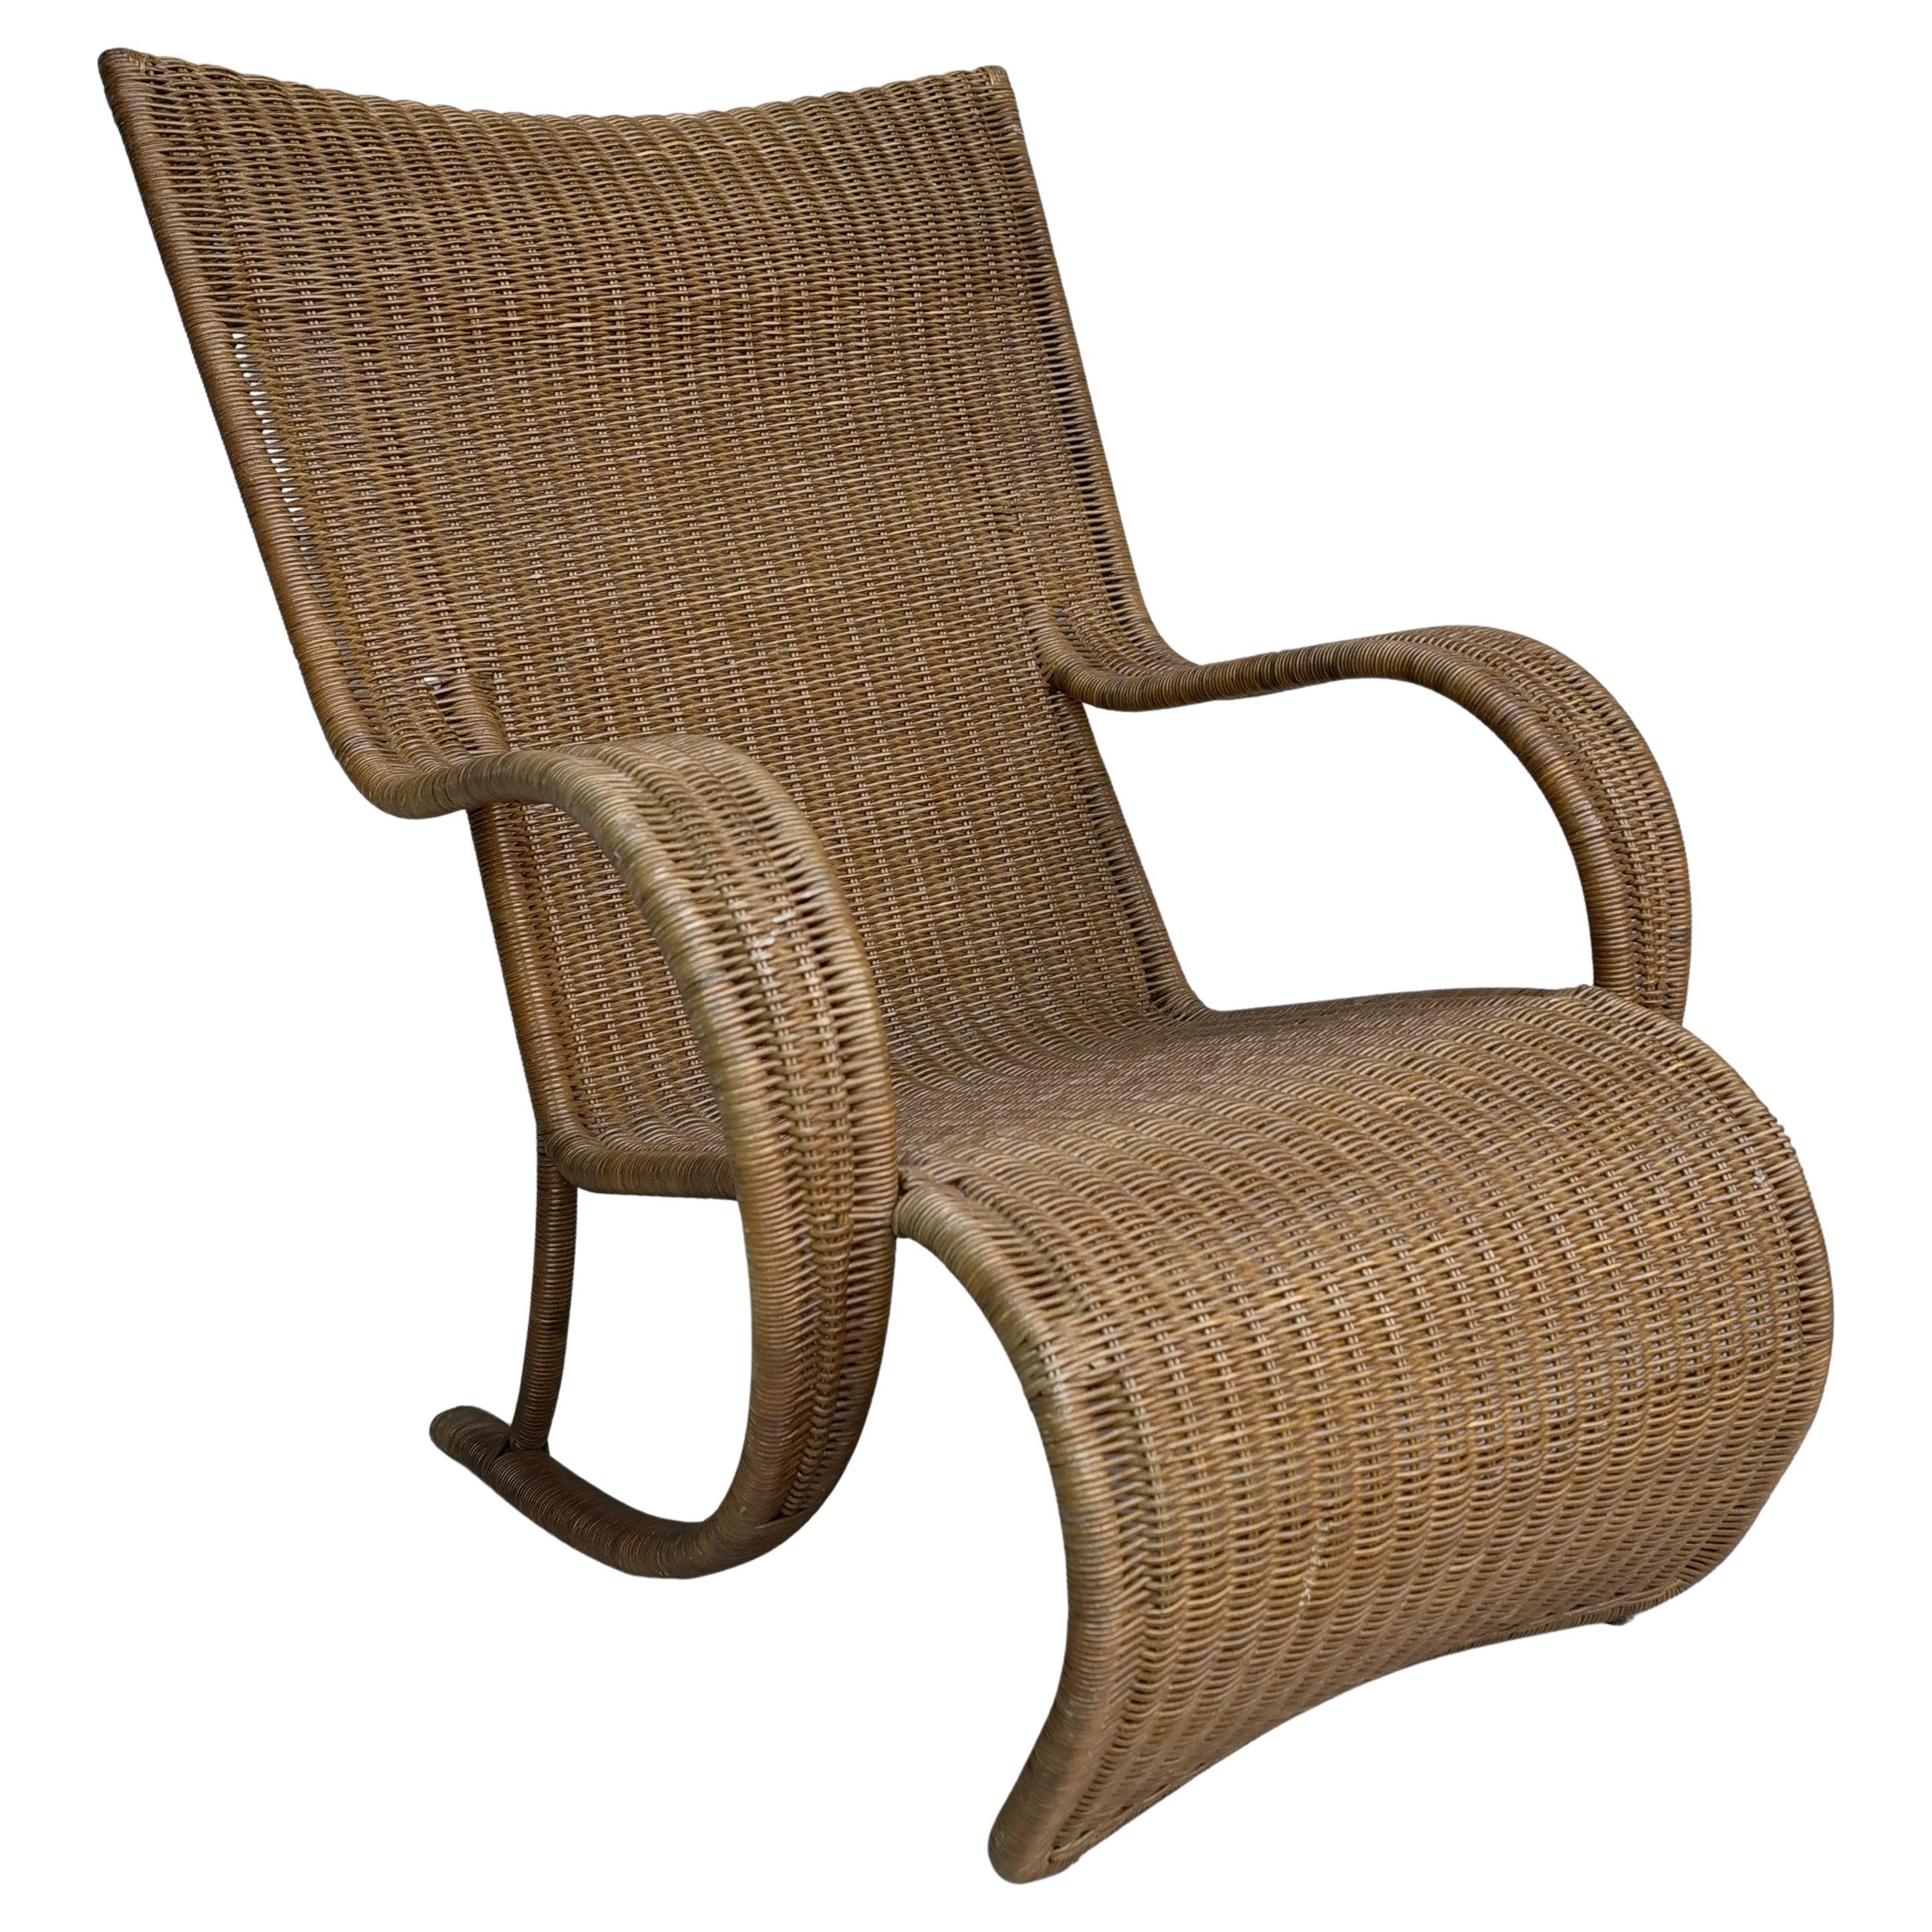 Large Sculptural Wicker Lounge Chair, France circa 1970 For Sale